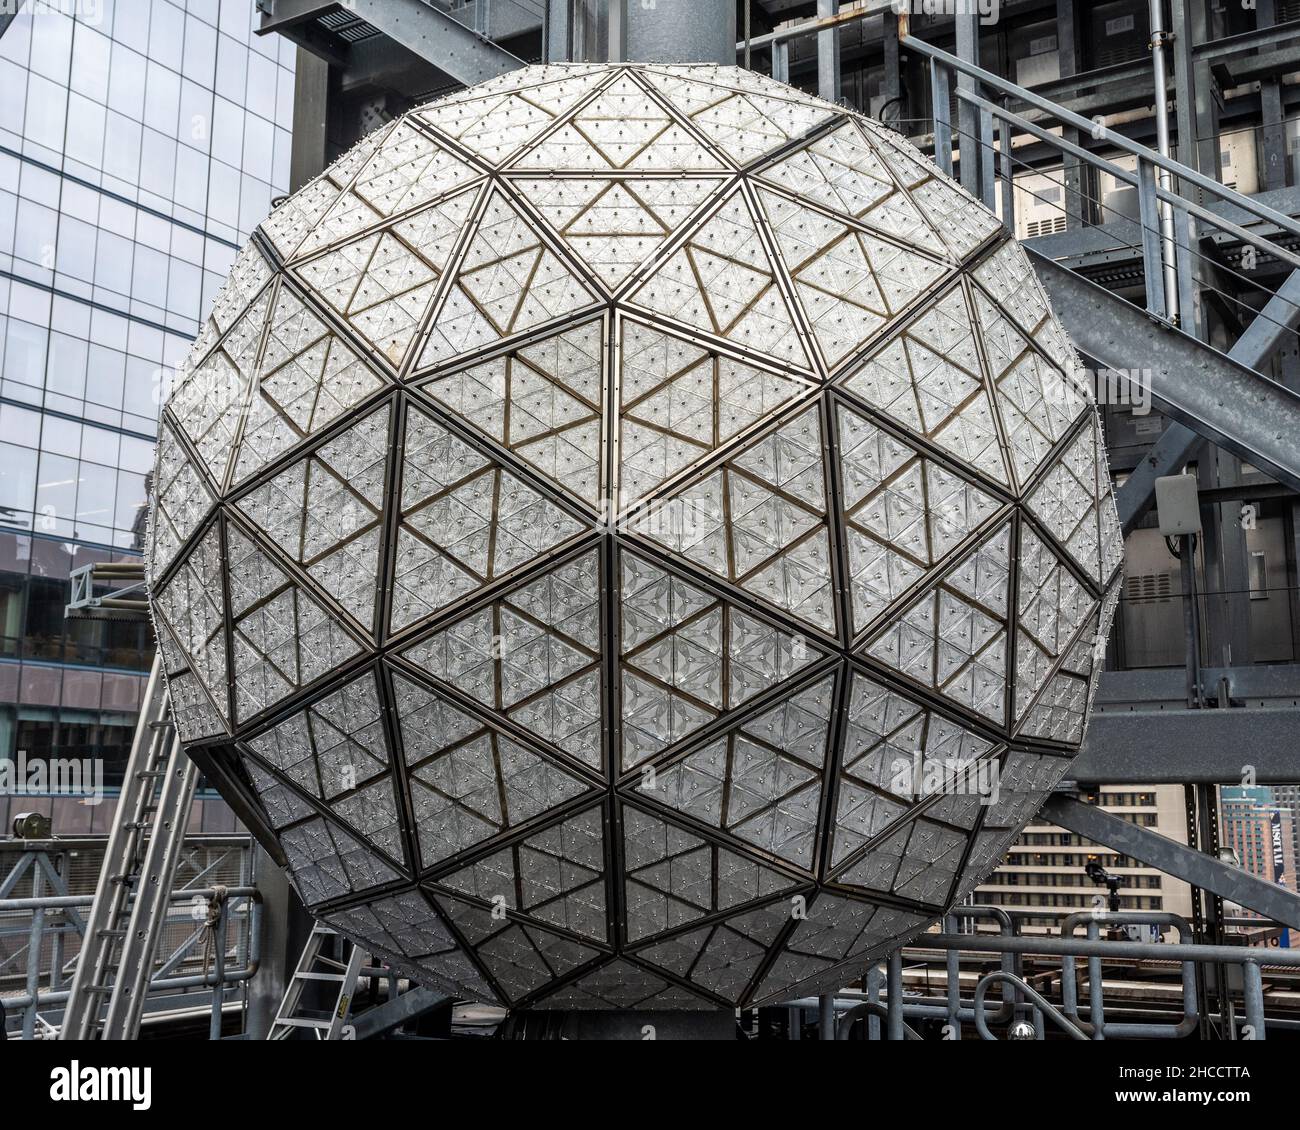 The Waterford Crystal New Year's Eve Ball is prepared for the NYE's eve ball drop atop One Times Square in New York, NY, on Dec. 27, 2021. The geodesic sphere is 12 feet in diameter, weighs 11,875 pounds, and is covered with 2,688 Waterford Crystal triangles -192 triangles introduce the new 'Gift of Wisdom.' (Photo by Gabriele Holtermann/Sipa USA) Stock Photo